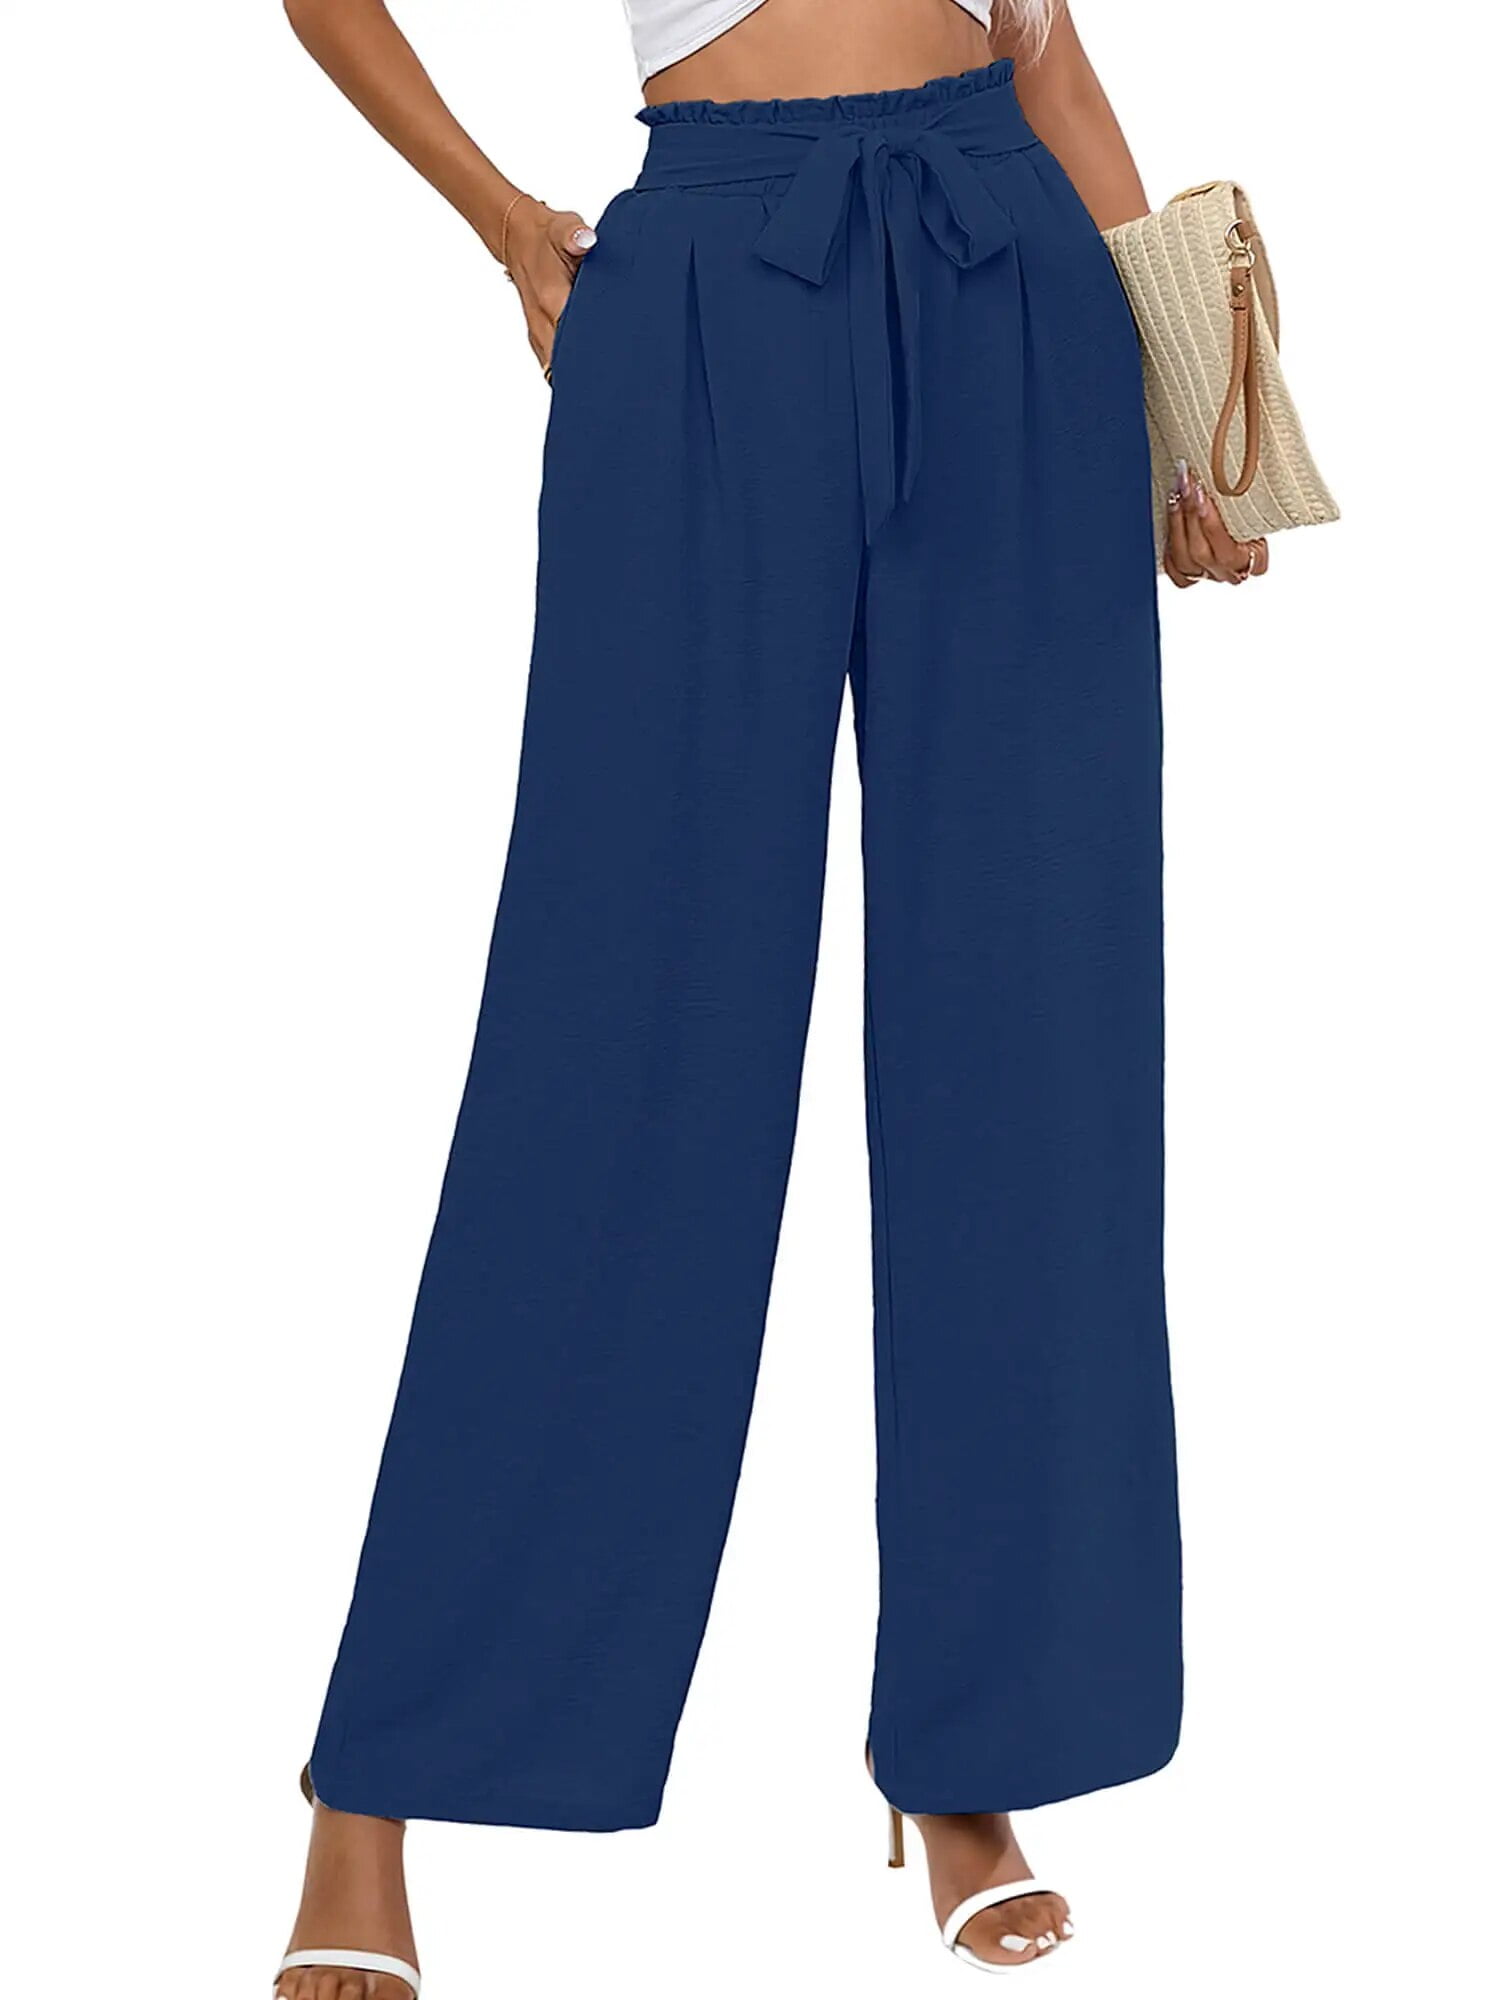 Chiclily Women's Wide Leg Pants with Pockets Lightweight High Waisted  Adjustable Tie Knot Loose Trousers Flowy Summer Beach Lounge Pants, US Size  2XL